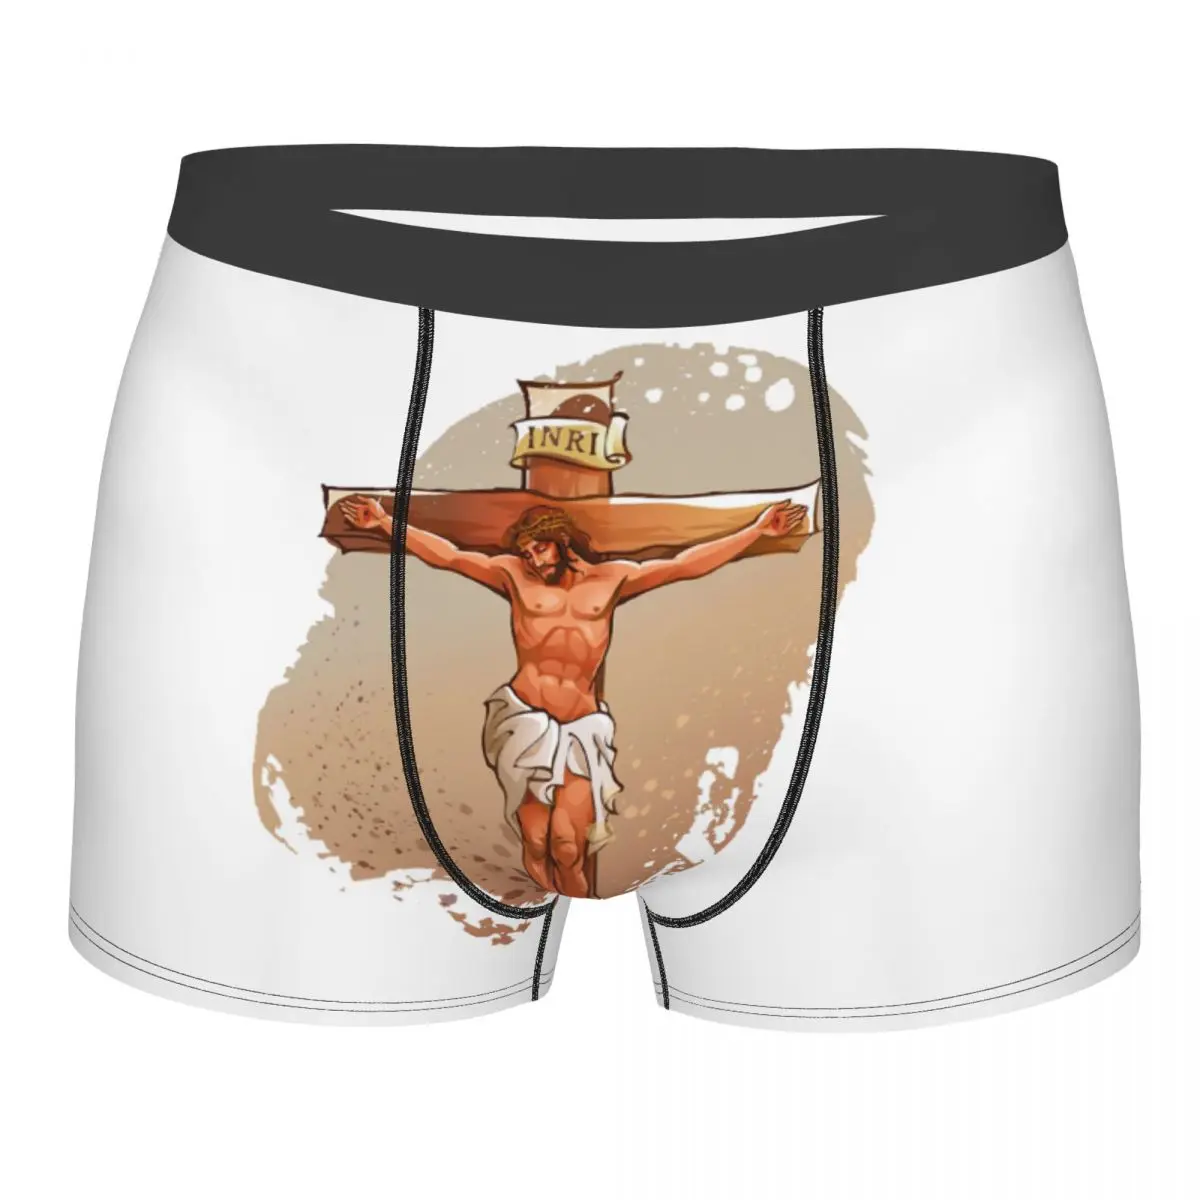 Cross Men's Boxer Briefs Boxer Briefs Highly Breathable Underwear High Quality Print Shorts Gift Idea leviathan cross men s boxer briefs boxer briefs highly breathable underwear high quality print shorts gift idea